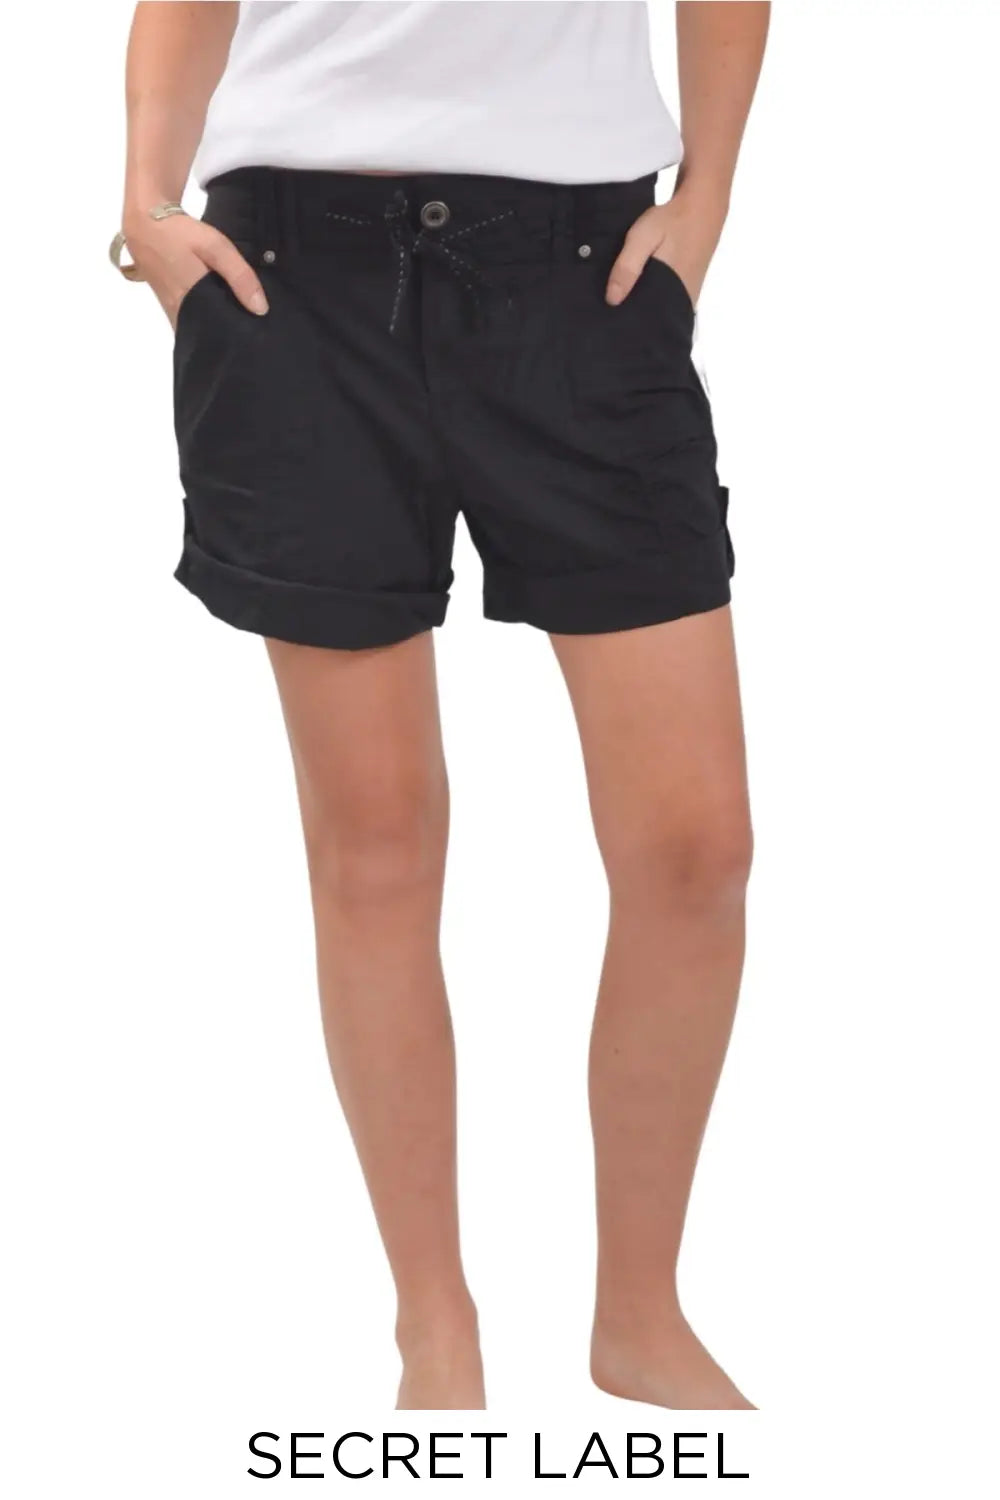 RQYYD Clearance Women's Solid High Waisted Wide Leg Shorts Summer